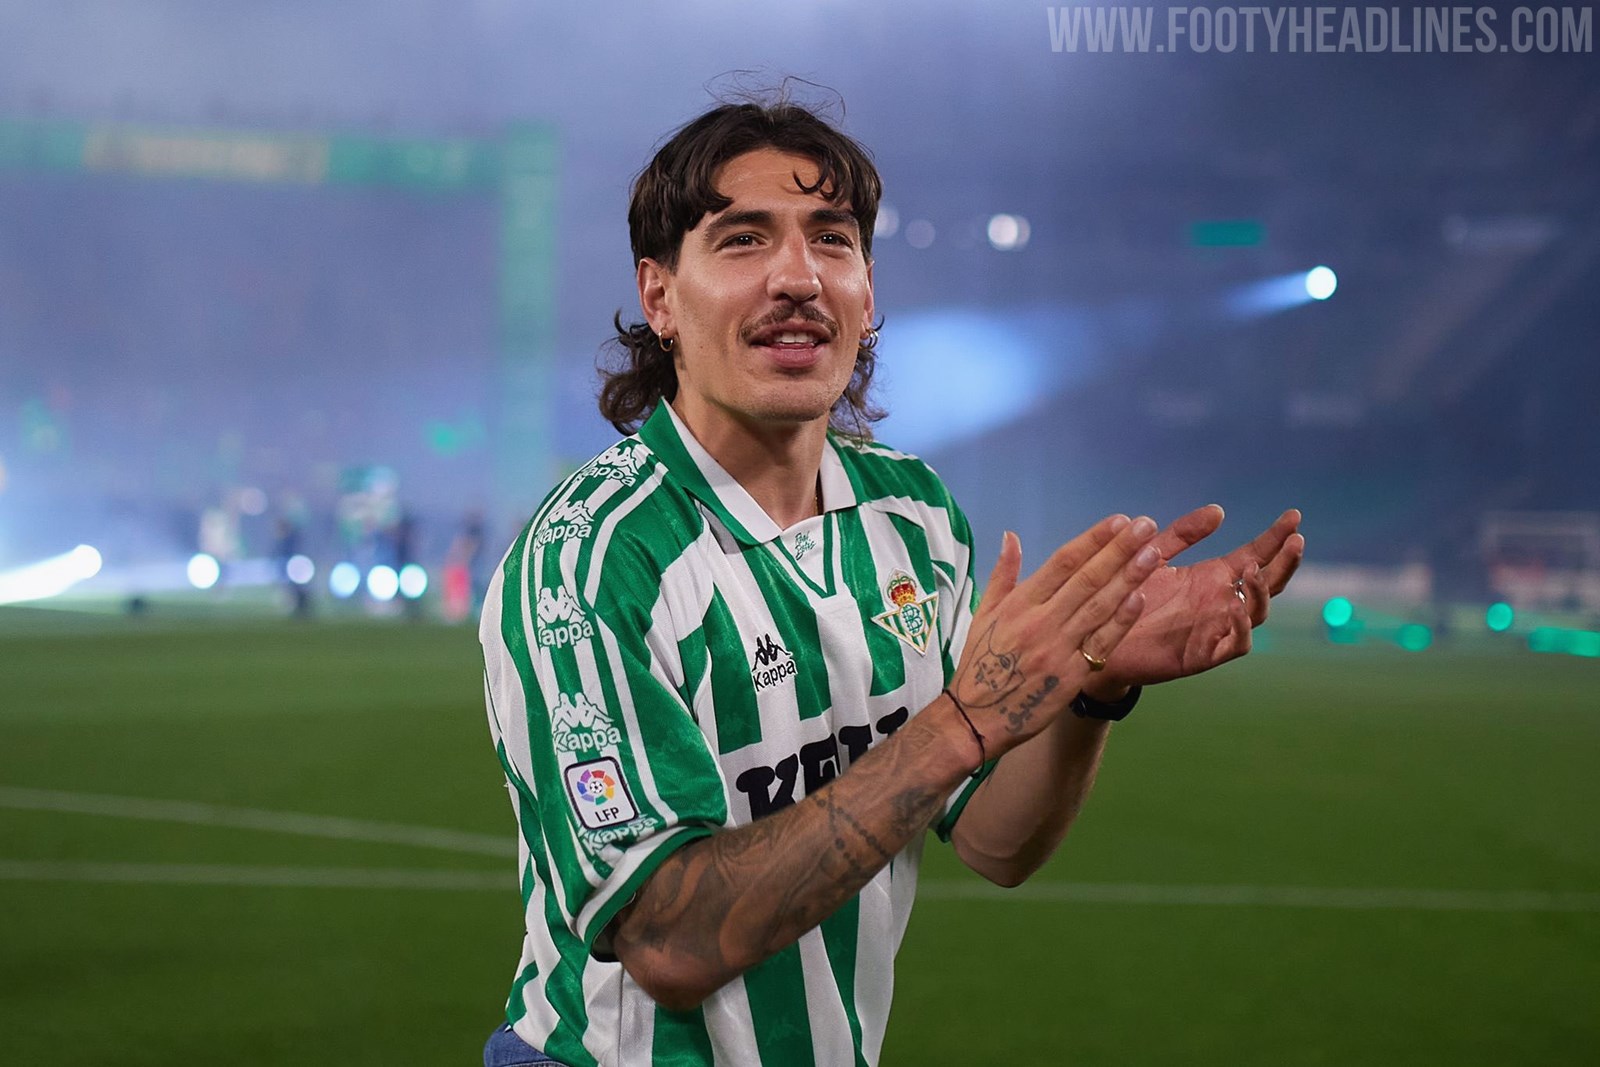 Real Betis Players Wear Vintage Shirts to Celebrate Del Rey Victory - Footy Headlines